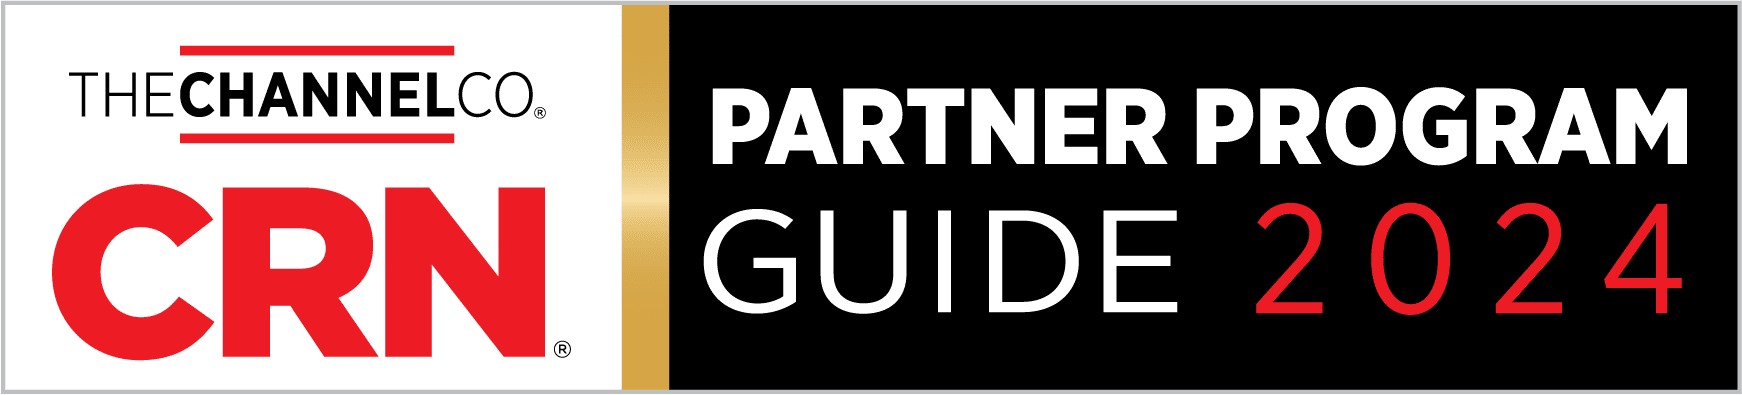 The image is a horizontally rectangular banner with a black background. It features the text "THECHANNELCO. CRN Partner Program Guide 2024" in white and red letters, with a small gold vertical bar on the left edge.